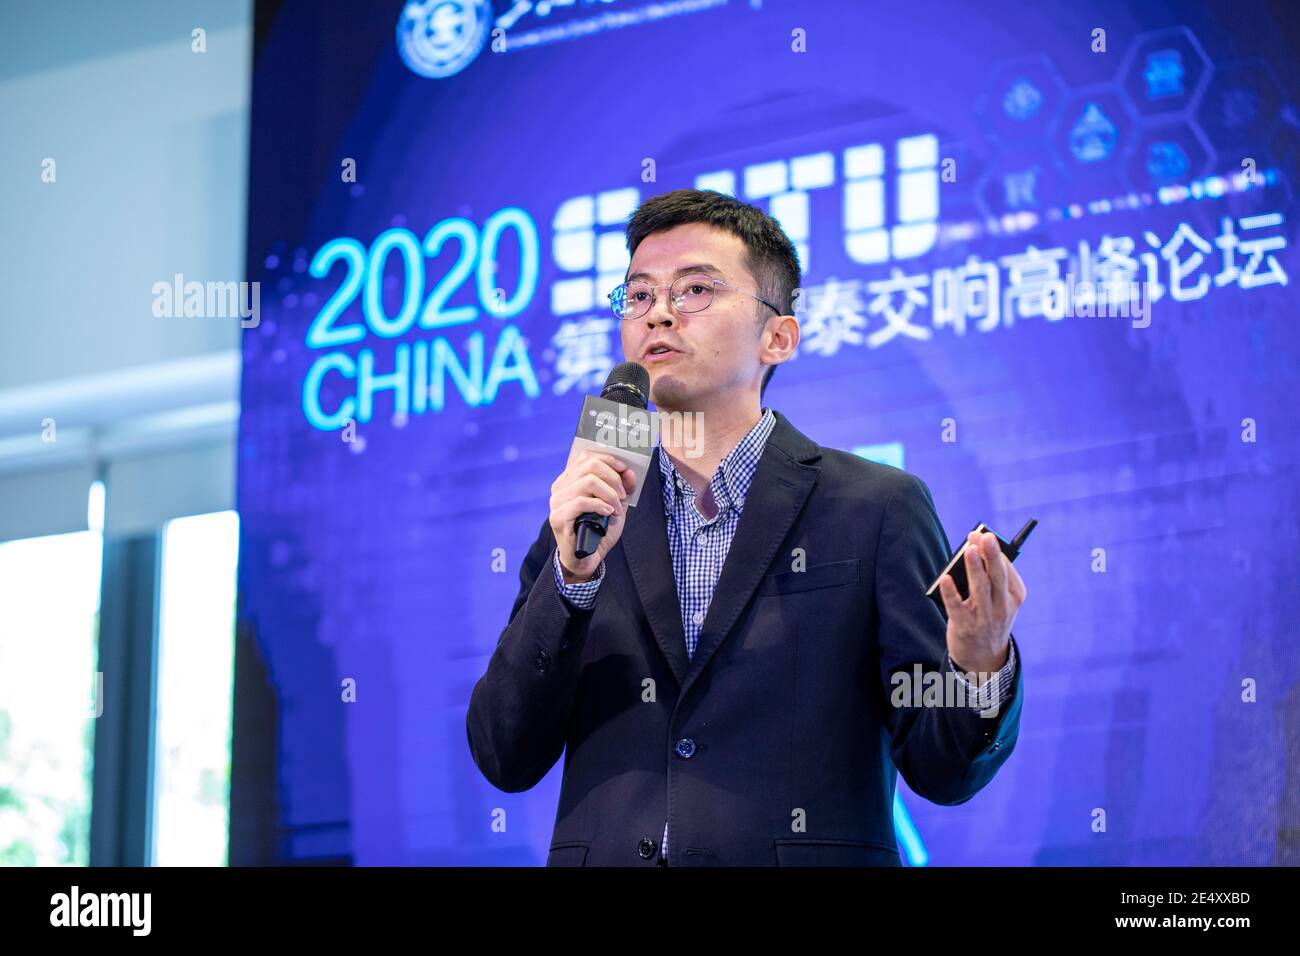 --FILE--Zhang Shaoting, vice president of SenseTime, currently the world's most valuable artificial intelligence (AI) company, delivers a speech durin Stock Photo